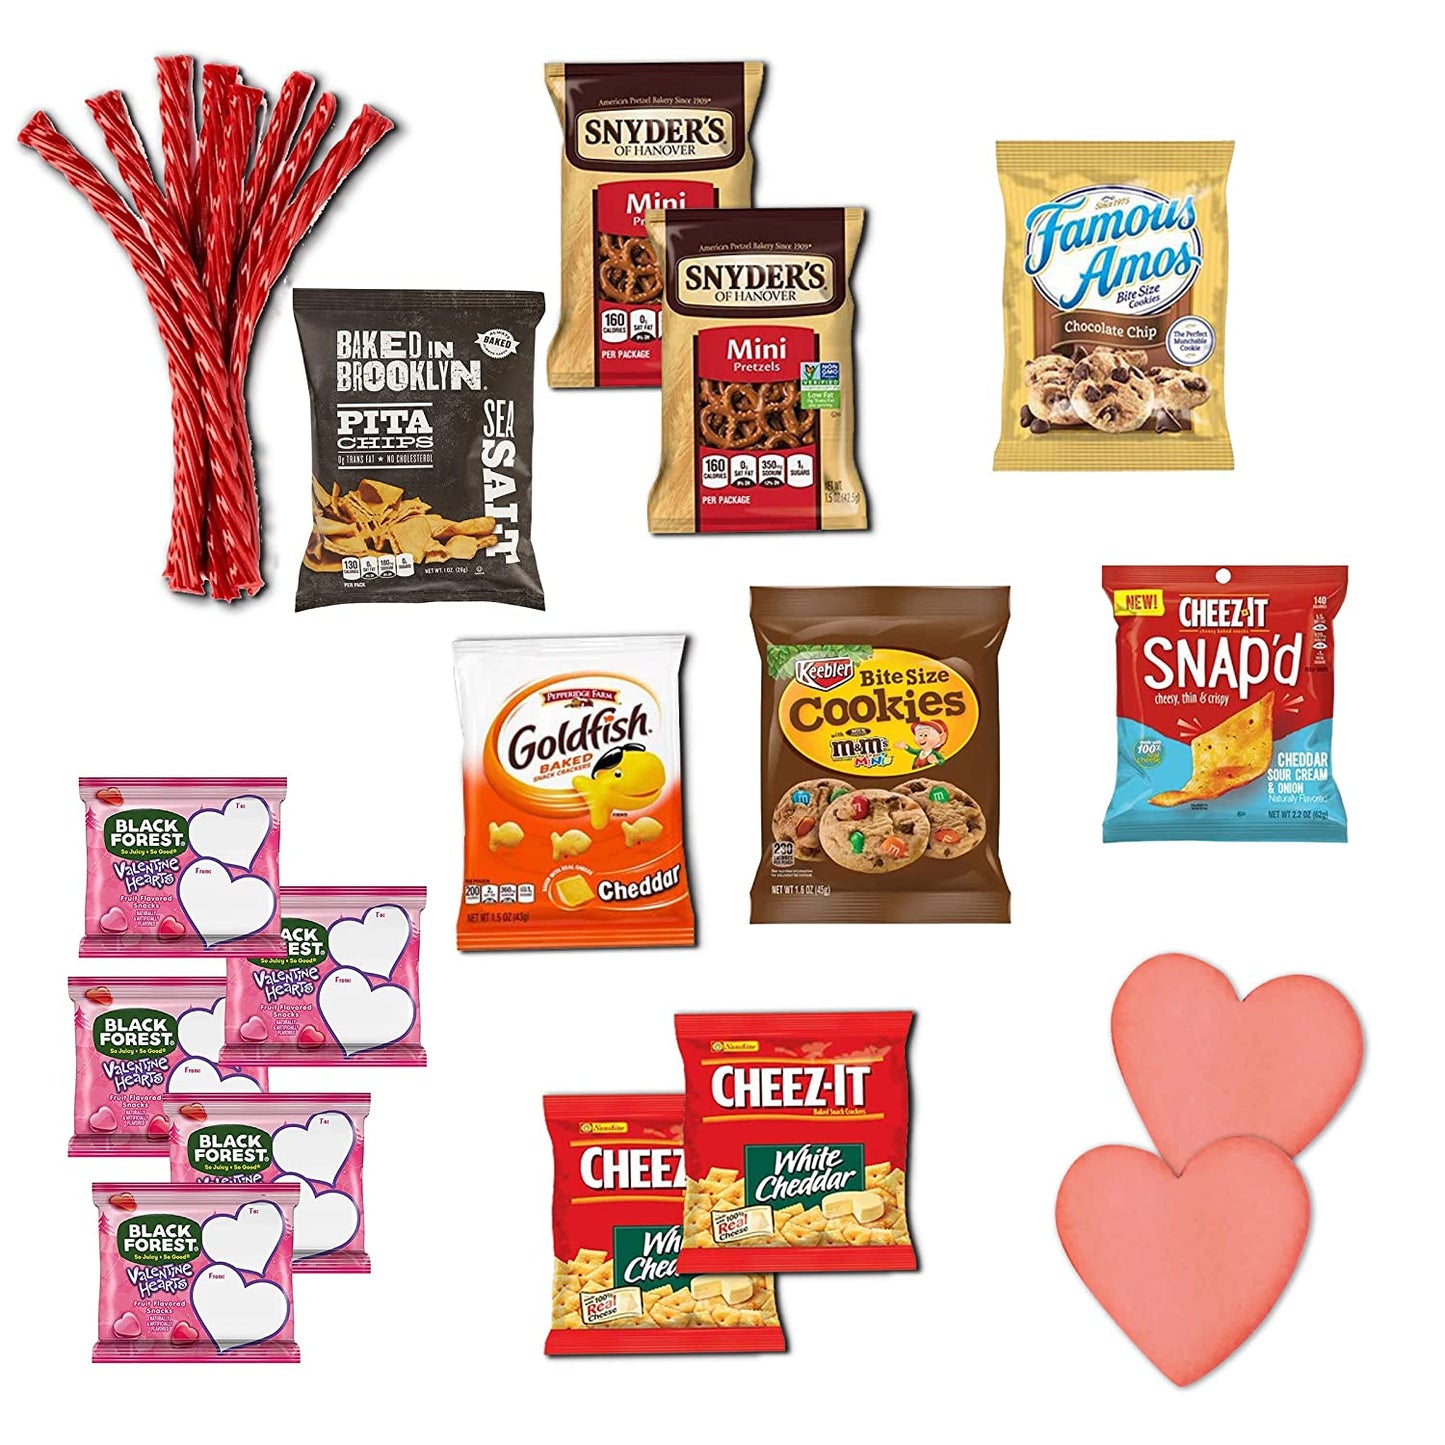 Valentine's Day Care Package (45ct) Snacks Chocolates Candy Gift Box Assortment Variety Bundle Crate Present for Boy Girl Friend Student College Child Husband Wife Boyfriend Girlfriend Love Niece